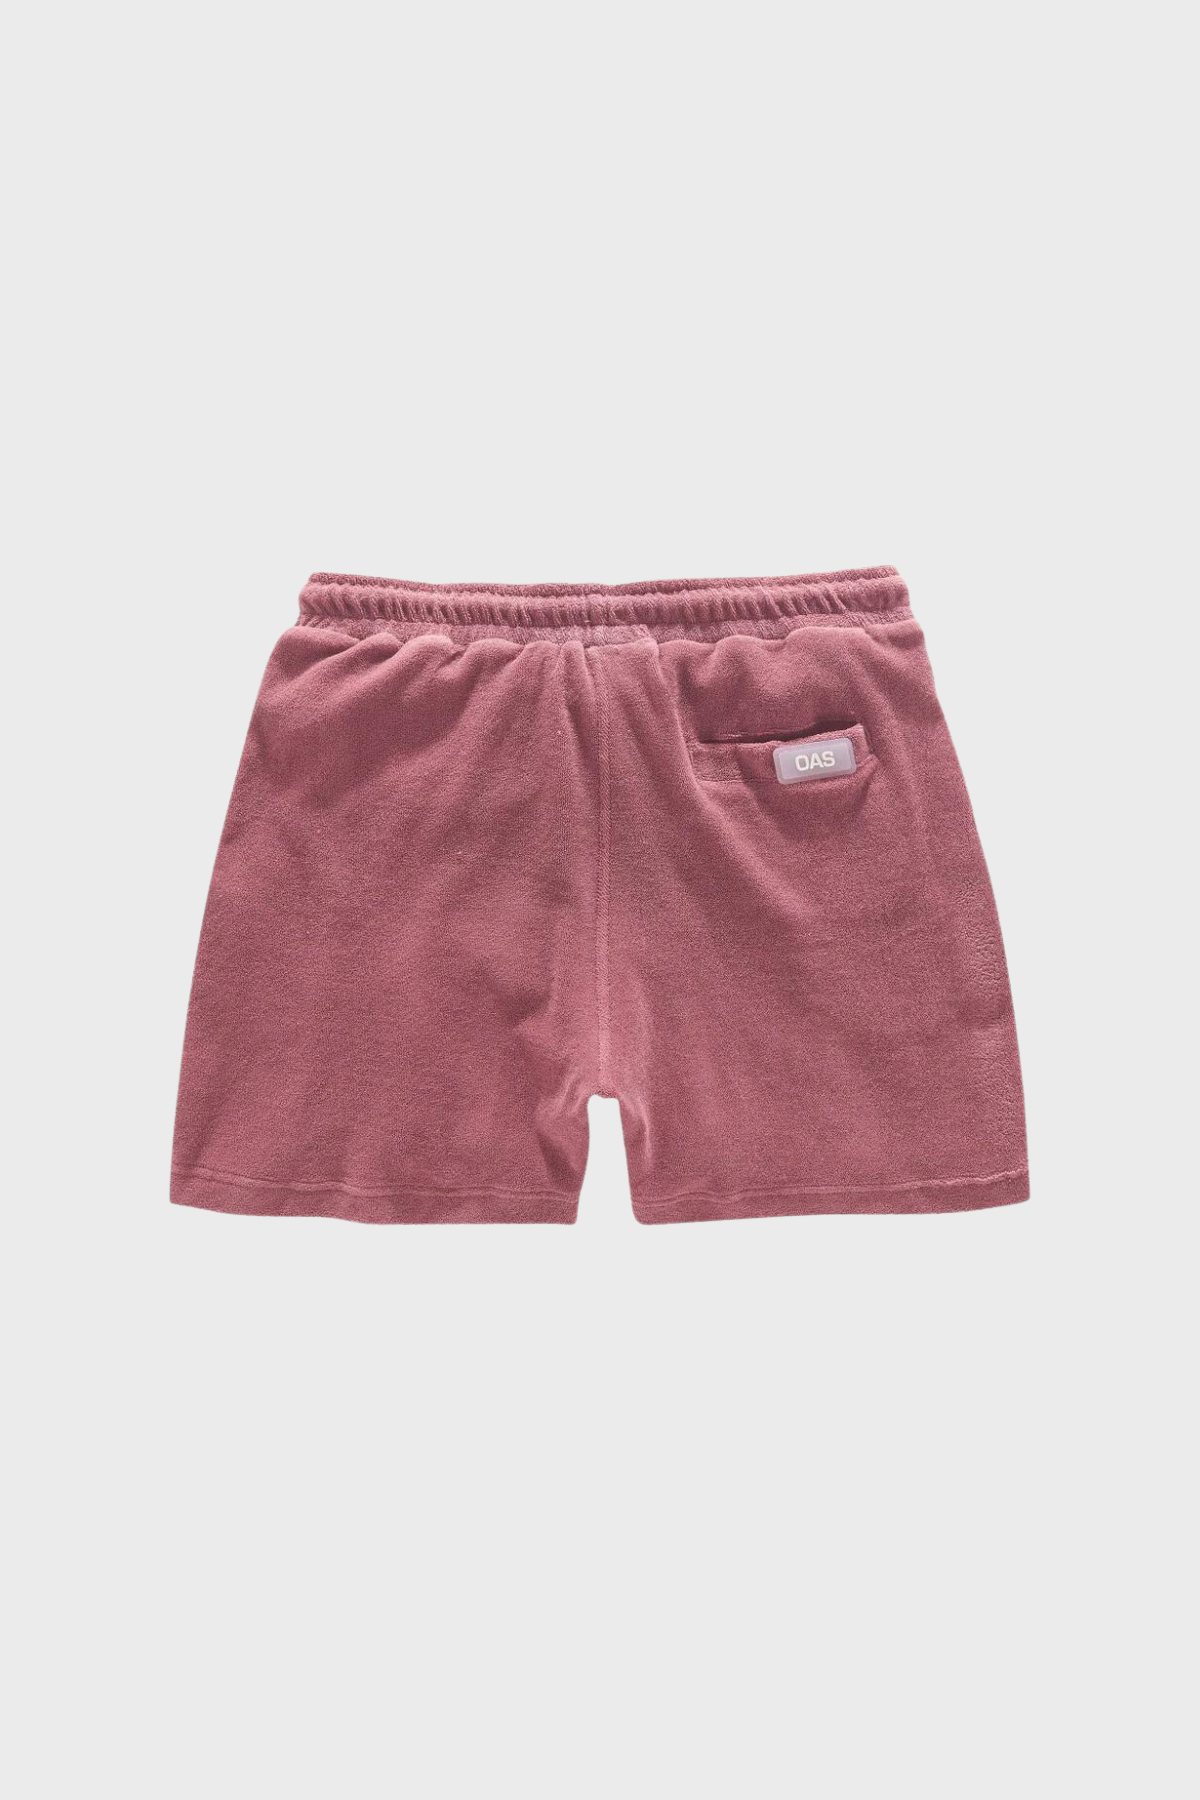 Terry Shorts in Dusty Plum